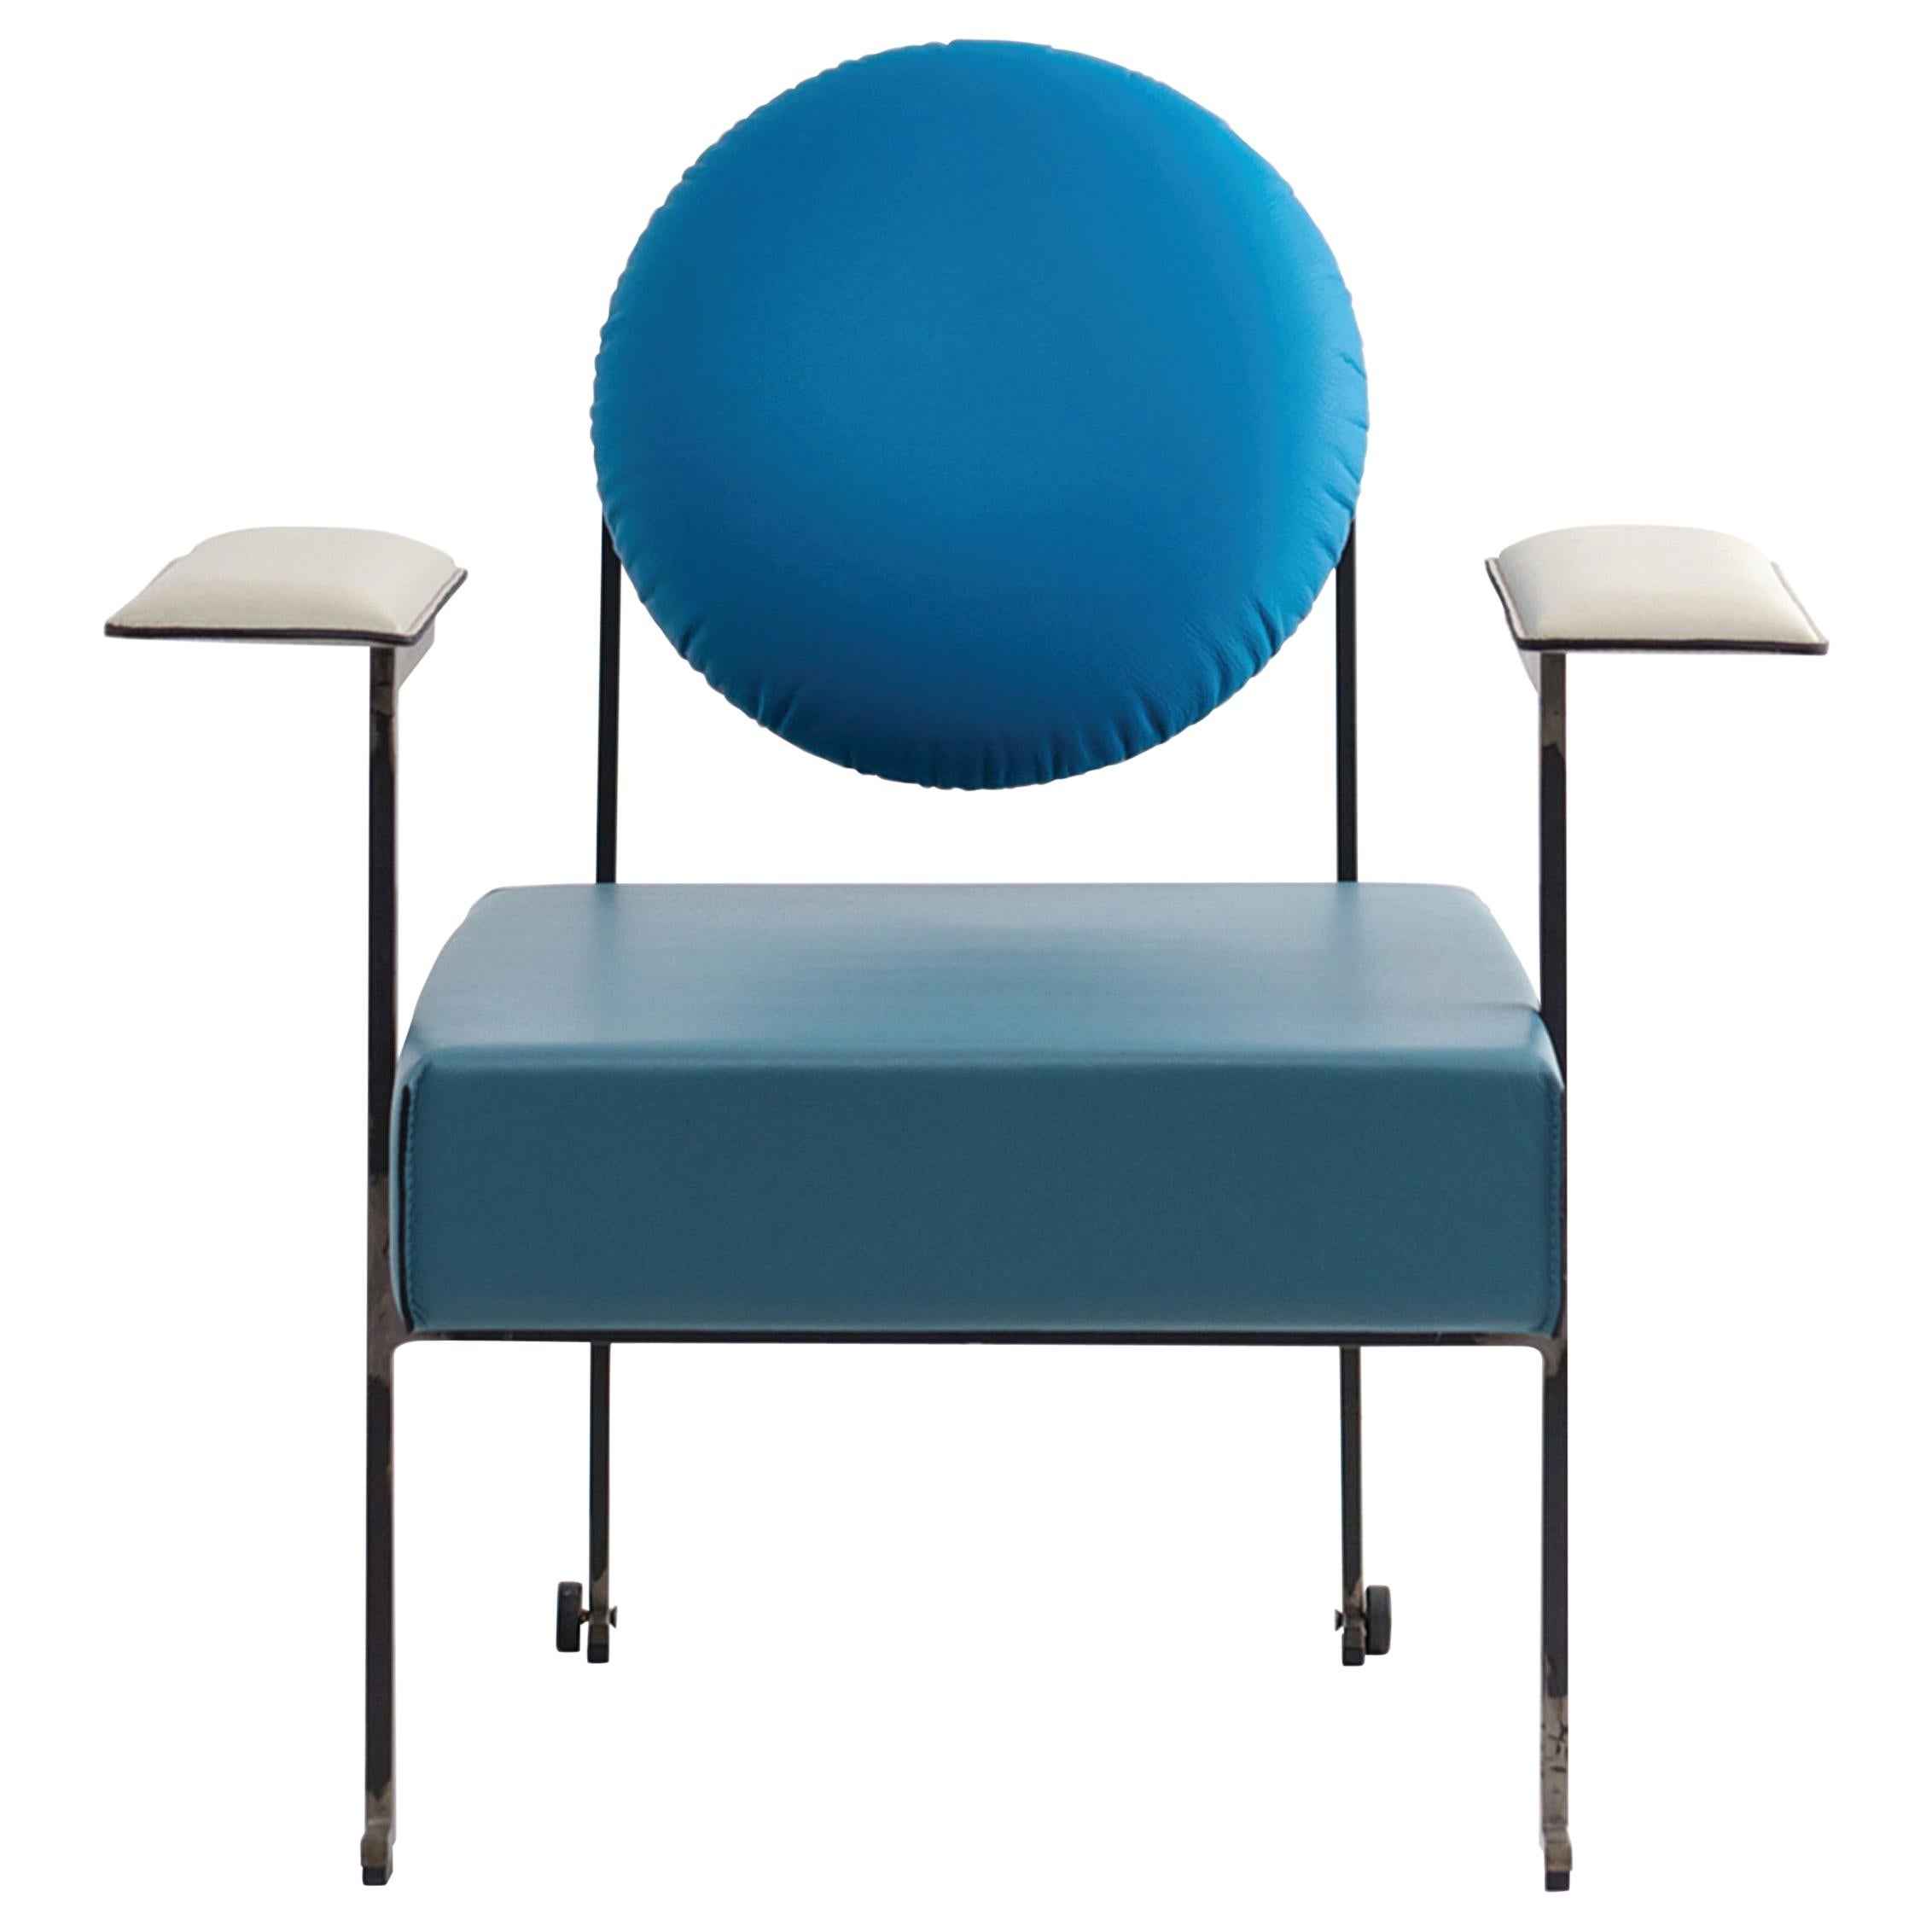 M Lounge Chair, Mixed Blue Leather Upholstery and Iron Frame by Mario Milana